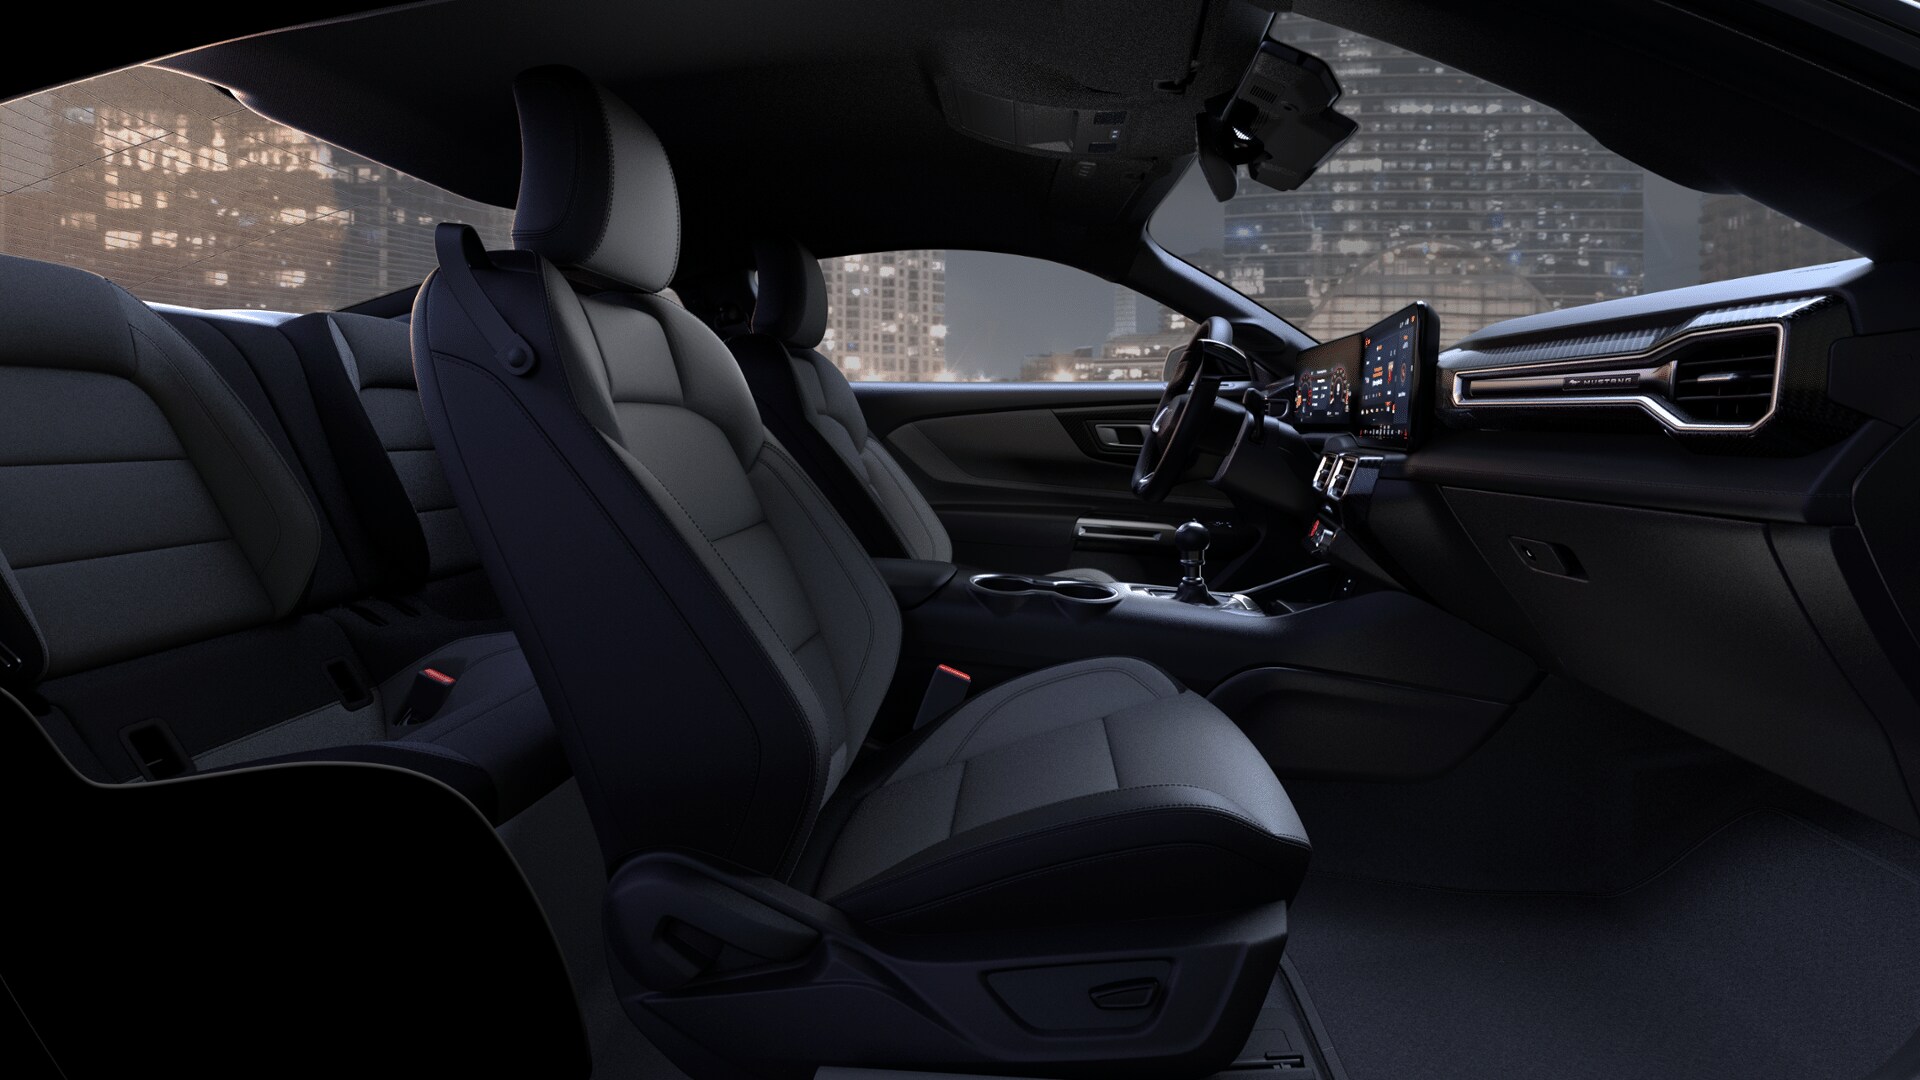 S650 Mustang Pics of the various GT Premium interior leather color choices? Official Space